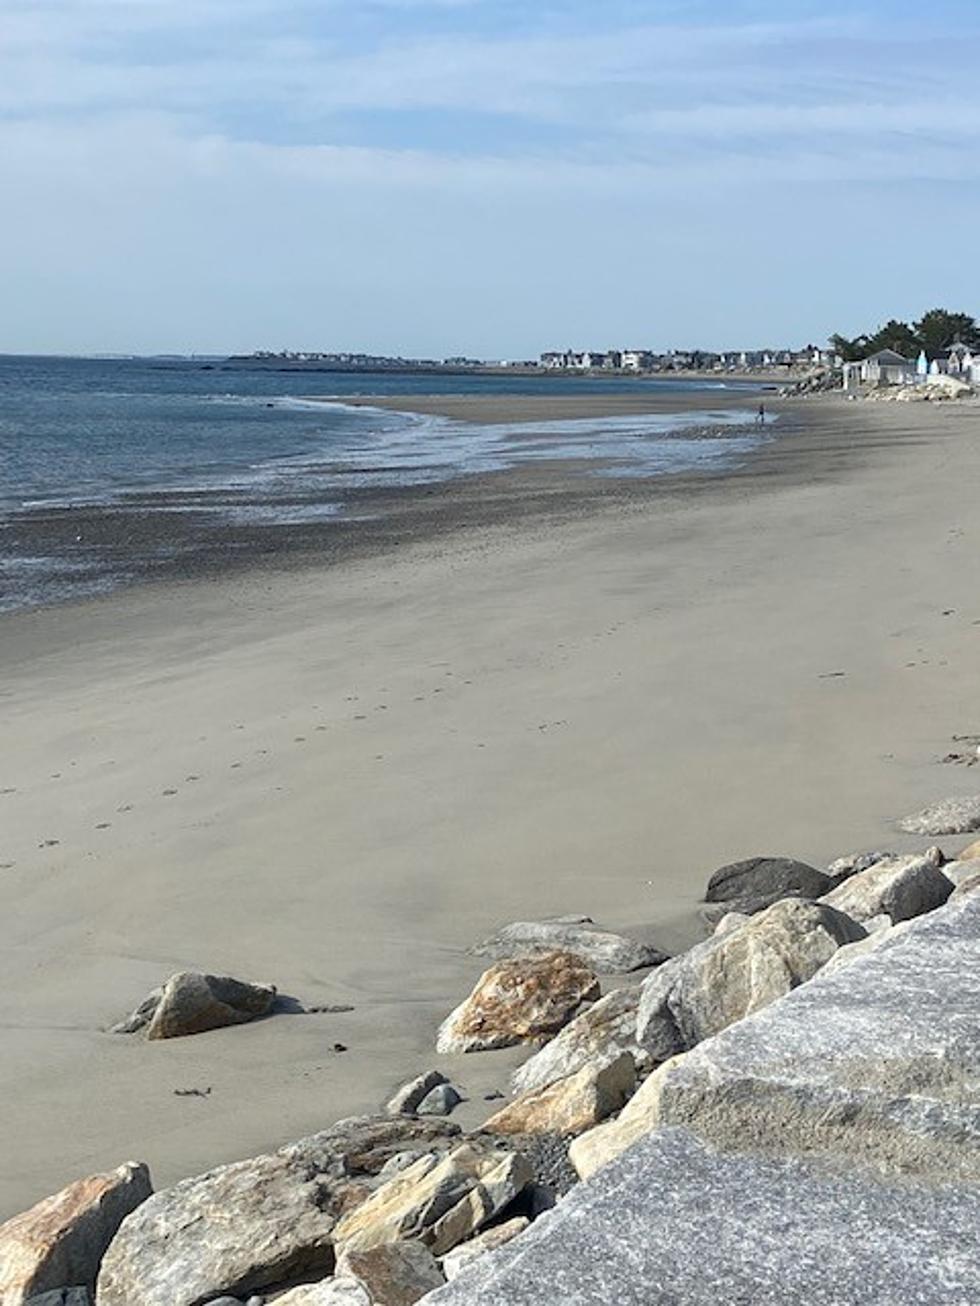 NH Residents Are More Comfortable Eating in a Restaurant and Going to the Beach